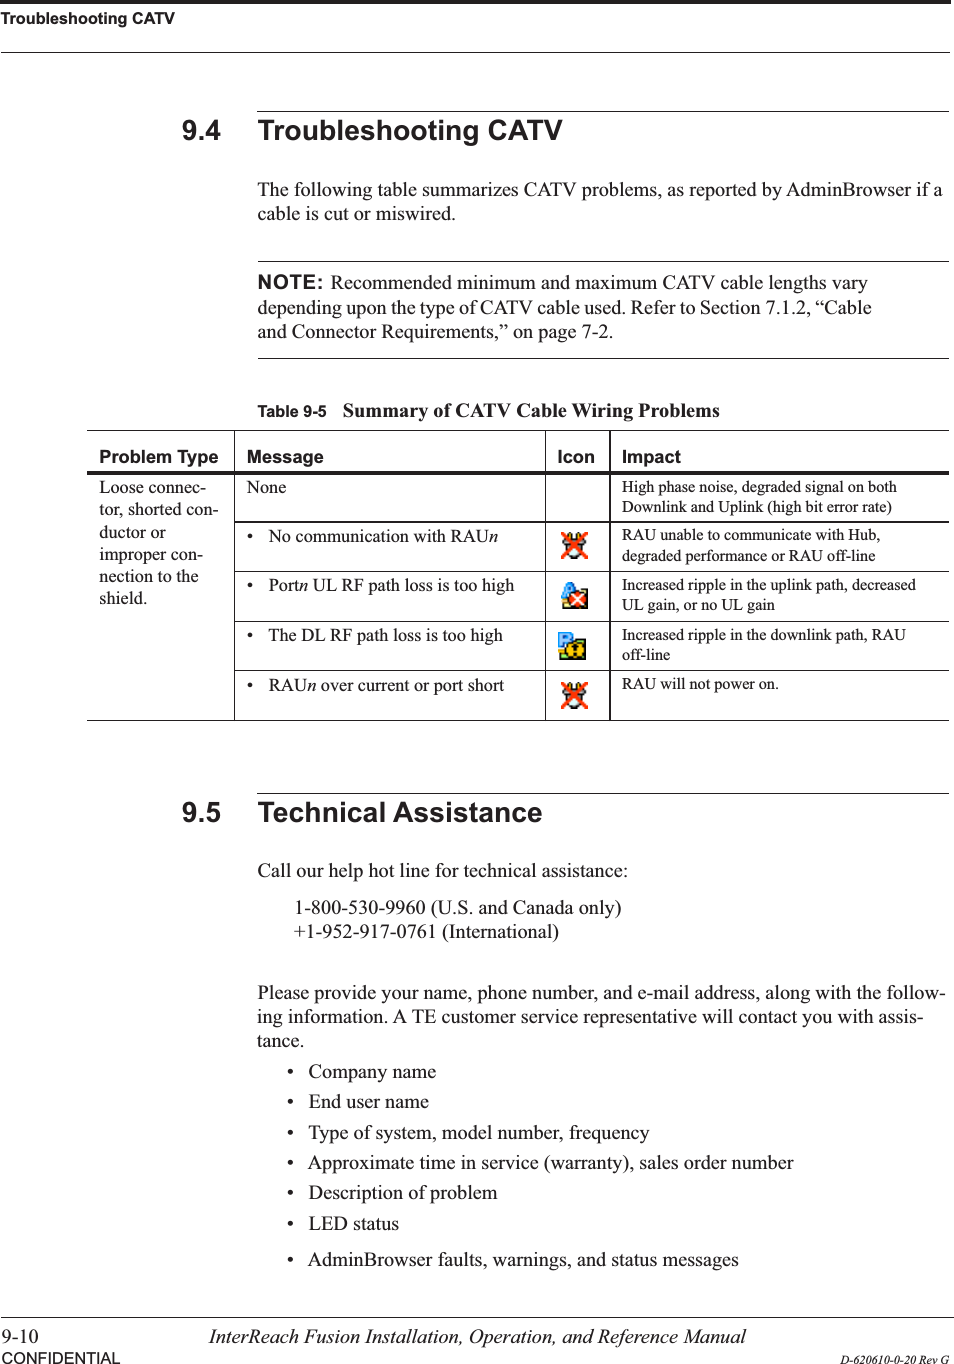 Troubleshooting CATV9-10 InterReach Fusion Installation, Operation, and Reference ManualCONFIDENTIAL D-620610-0-20 Rev G9.4 Troubleshooting CATVThe following table summarizes CATV problems, as reported by AdminBrowser if a cable is cut or miswired.Table 9-5 Summary of CATV Cable Wiring ProblemsProblem Type Message Icon ImpactLoose connec-tor, shorted con-ductor or improper con-nection to the shield.None High phase noise, degraded signal on both Downlink and Uplink (high bit error rate)• No communication with RAUnRAU unable to communicate with Hub, degraded performance or RAU off-line• Portn UL RF path loss is too high Increased ripple in the uplink path, decreased UL gain, or no UL gain• The DL RF path loss is too high Increased ripple in the downlink path, RAU off-line• RAUn over current or port short RAU will not power on.NOTE: Recommended minimum and maximum CATV cable lengths vary depending upon the type of CATV cable used. Refer to Section 7.1.2, “Cable and Connector Requirements,” on page 7-2.9.5 Technical AssistanceCall our help hot line for technical assistance:1-800-530-9960 (U.S. and Canada only)+1-952-917-0761 (International)Please provide your name, phone number, and e-mail address, along with the follow-ing information. A TE customer service representative will contact you with assis-tance.• Company name• End user name• Type of system, model number, frequency• Approximate time in service (warranty), sales order number• Description of problem• LED status• AdminBrowser faults, warnings, and status messages